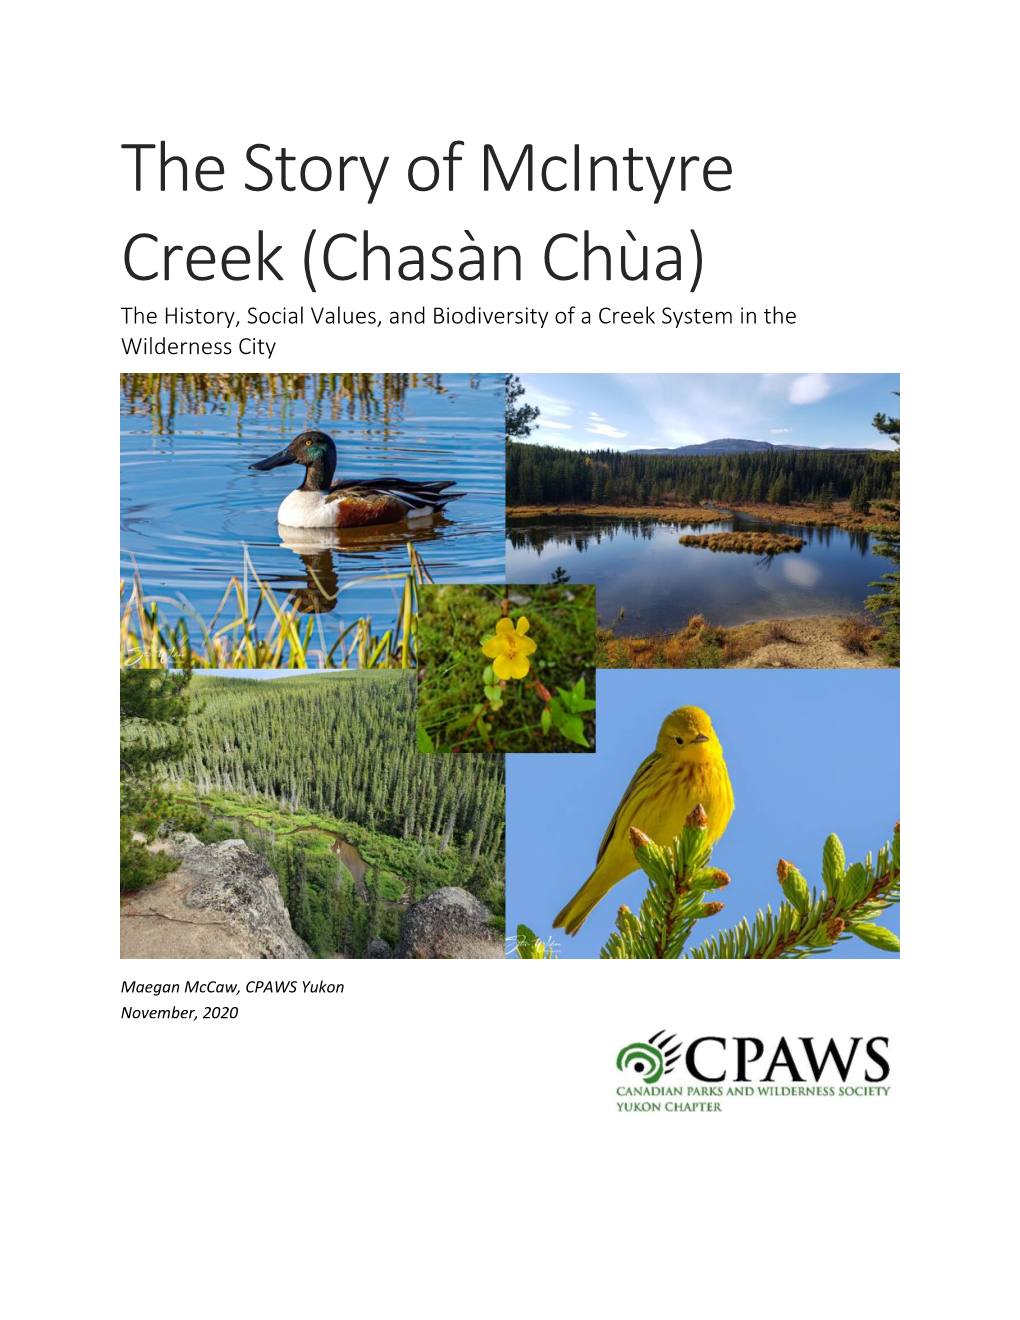 The Story of Mcintyre Creek (Chasàn Chùa) the History, Social Values, and Biodiversity of a Creek System in the Wilderness City